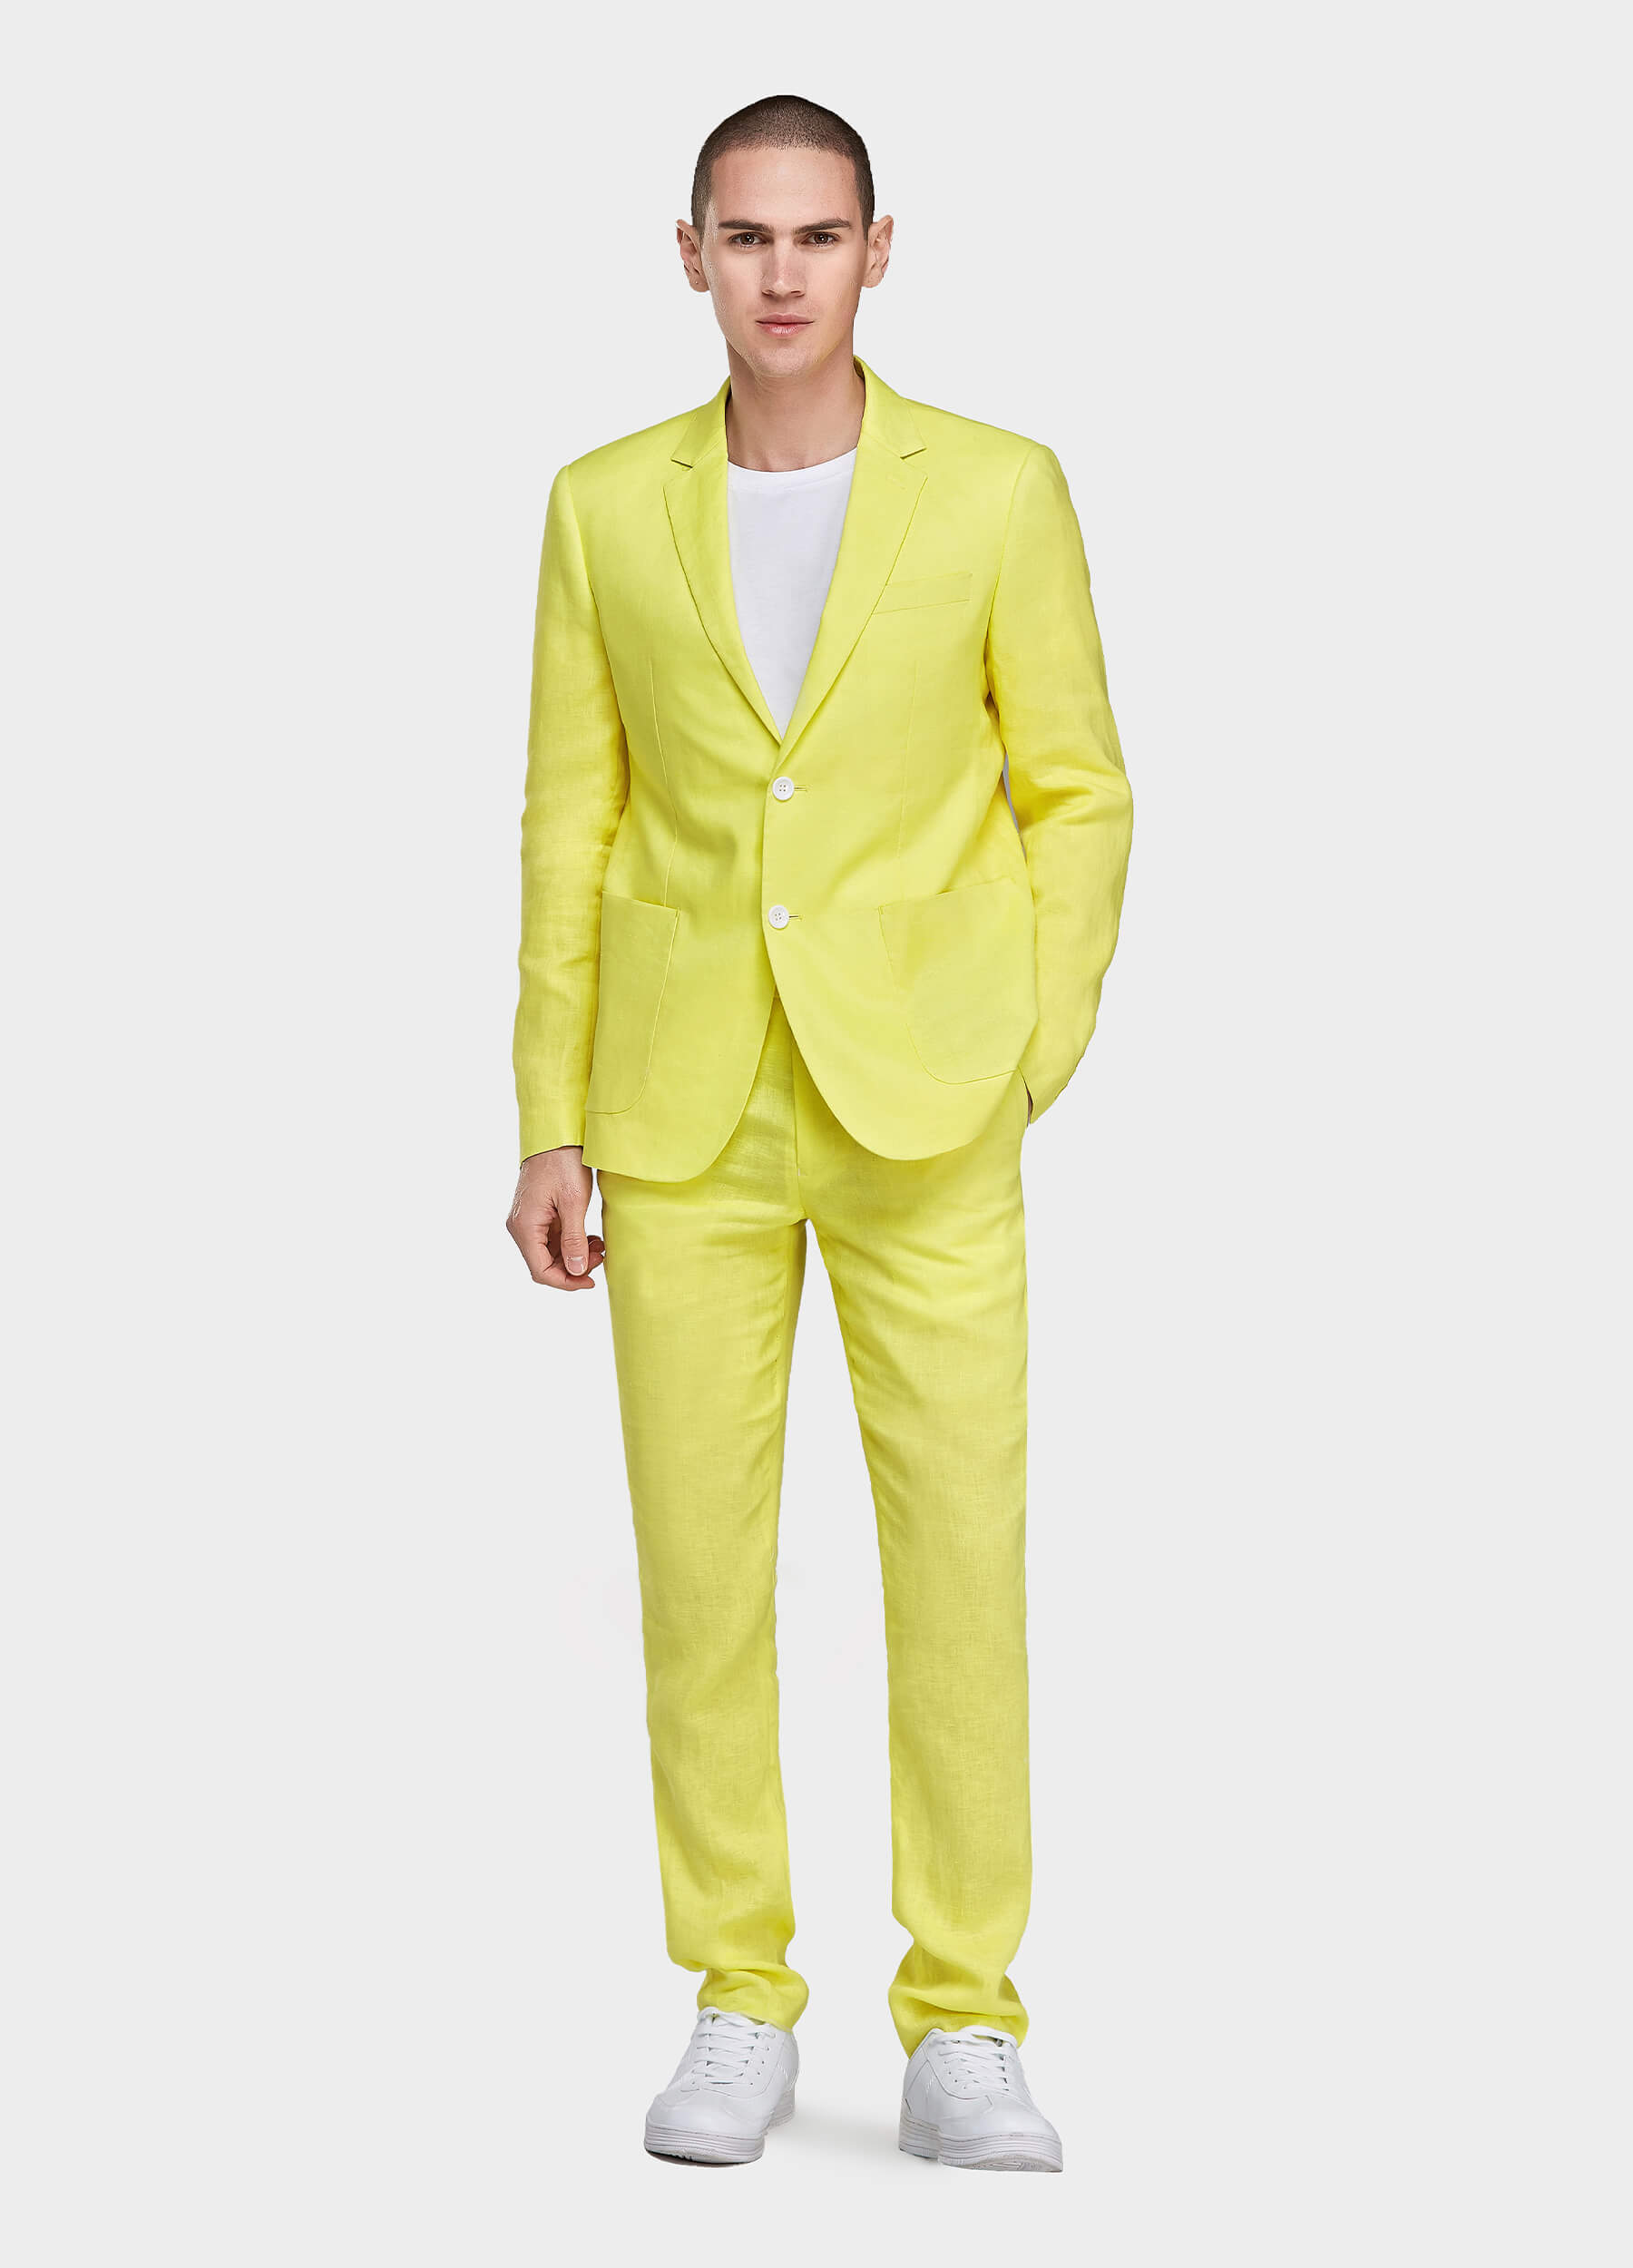 Skinny Neon Double Breasted Suit Jacket | boohoo